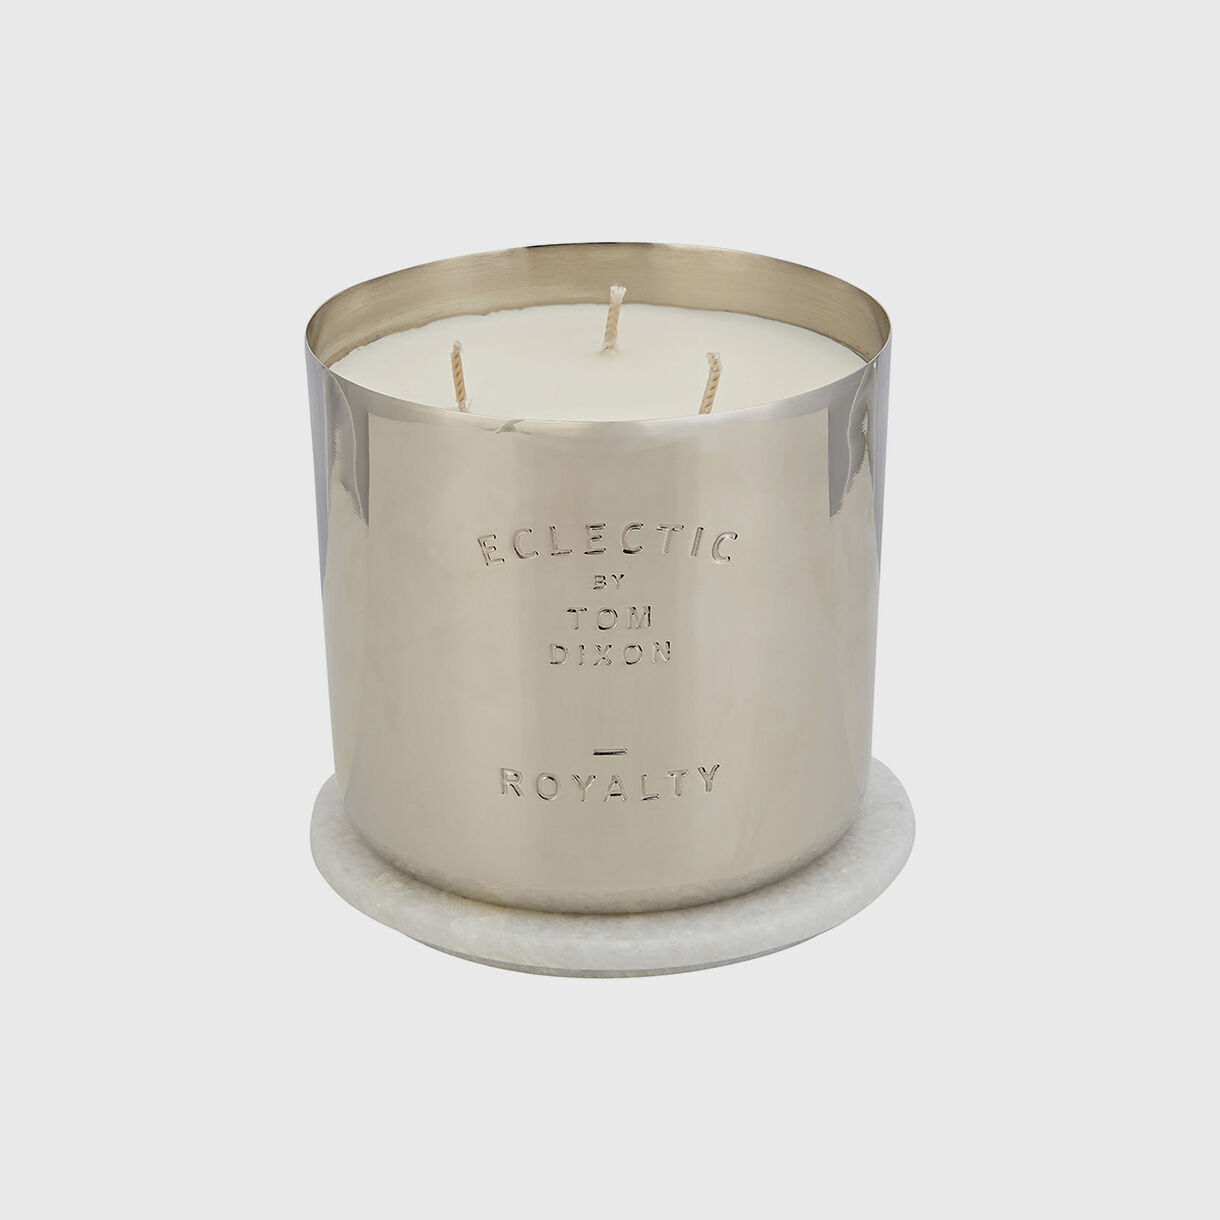 Eclectic Royalty Candle, Large